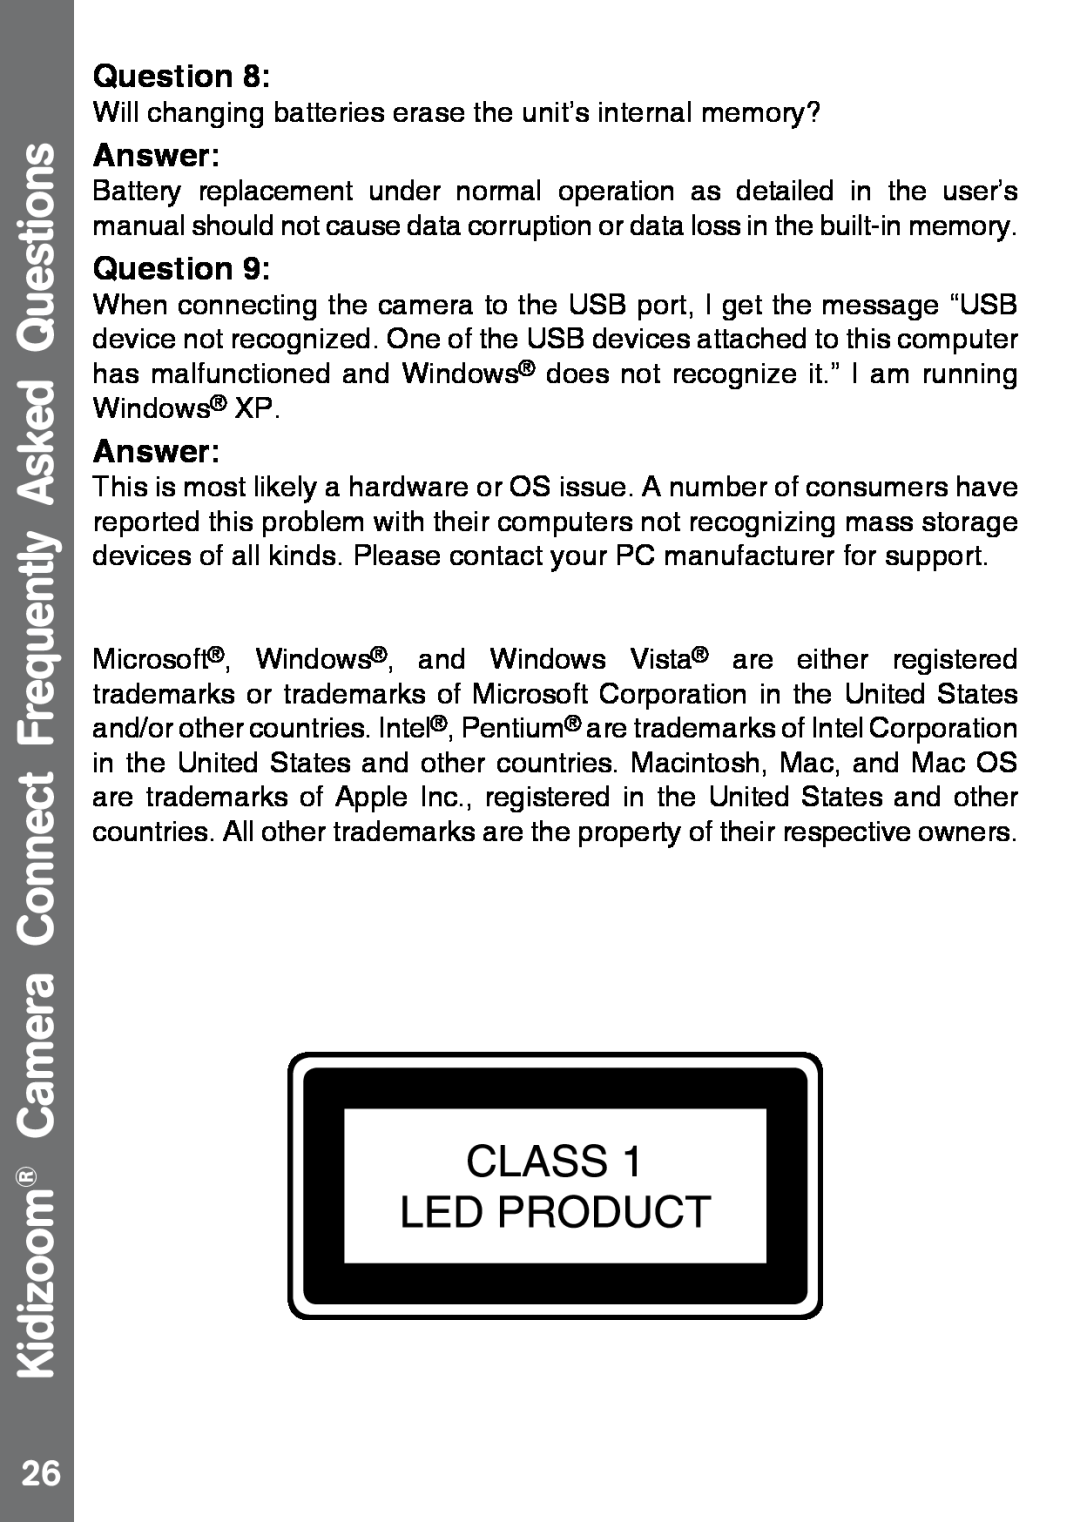 VTech 91-002843-000 user manual Kidizoom Camera Connect Frequently Asked Questions, Answer 